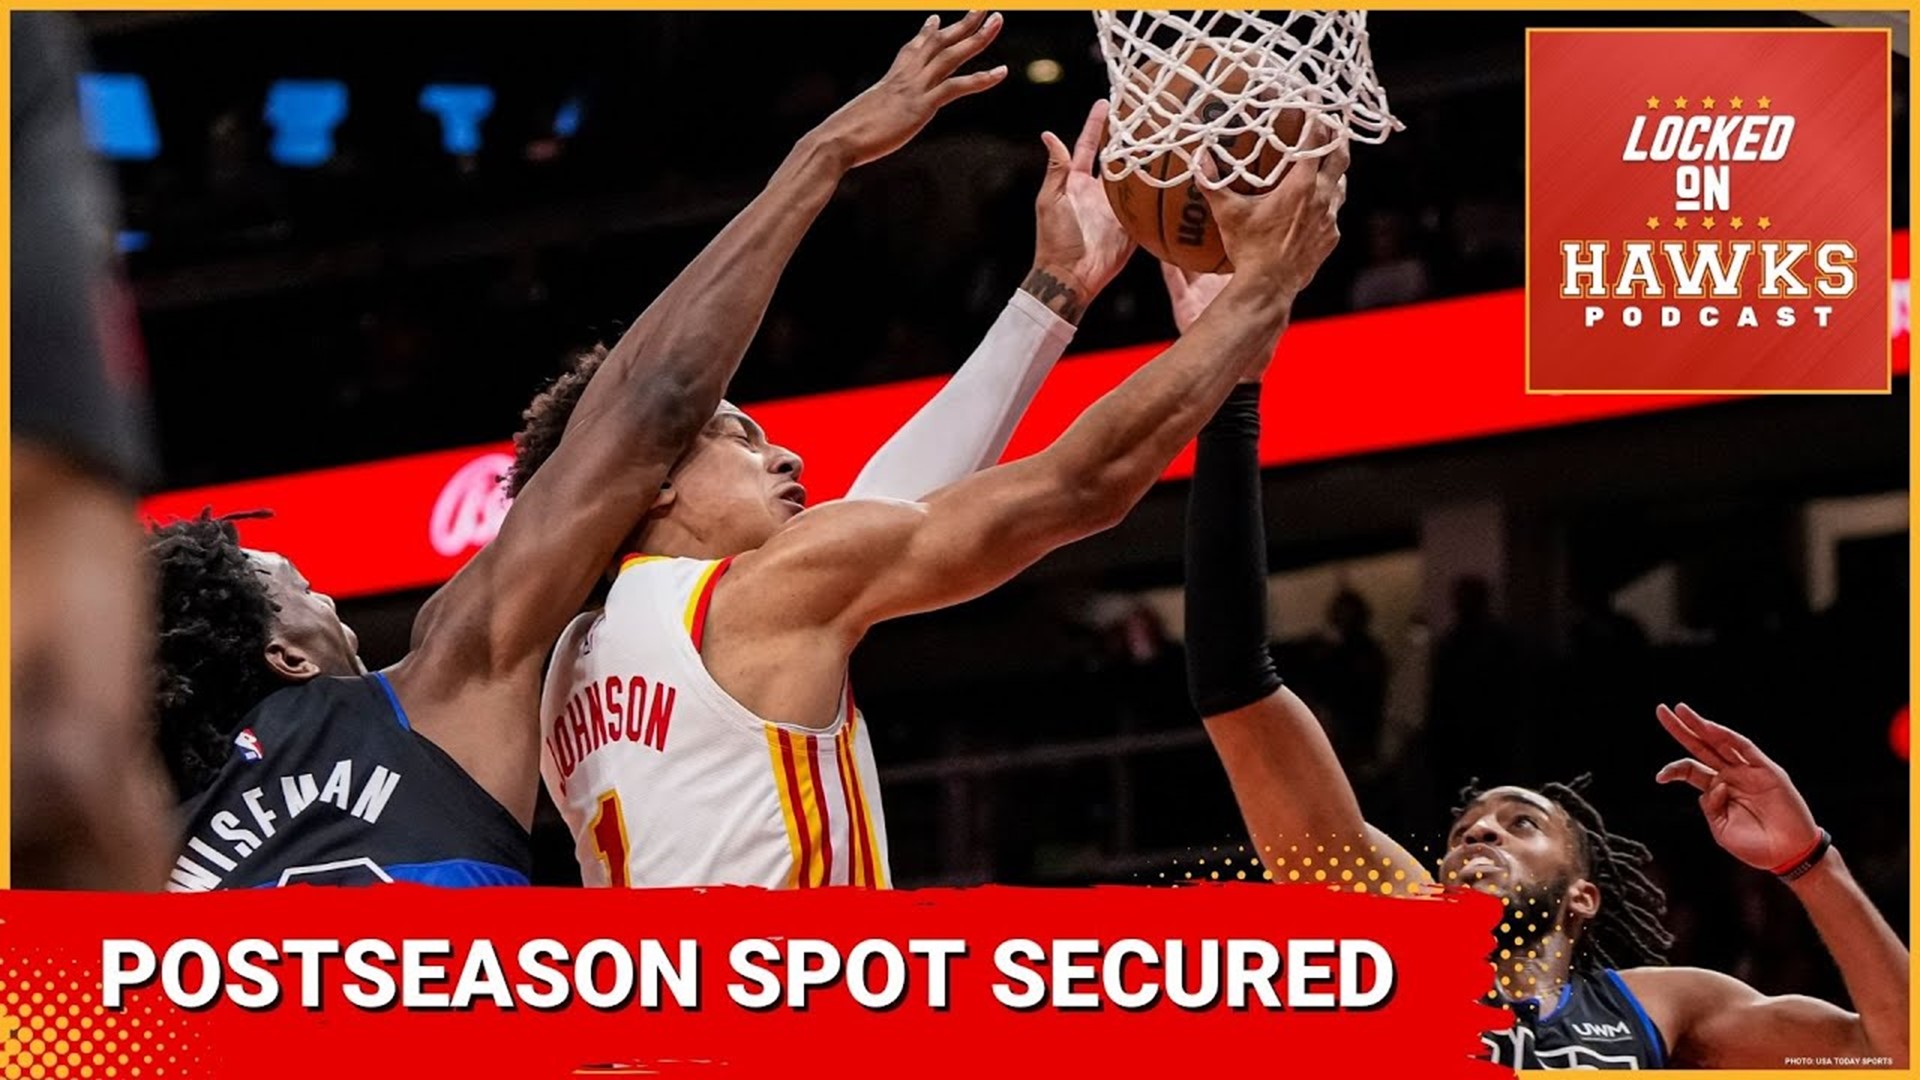 The show breaks down Wednesday’s game between the Atlanta Hawks and the Detroit Pistons, including the Hawks clinching a postseason berth